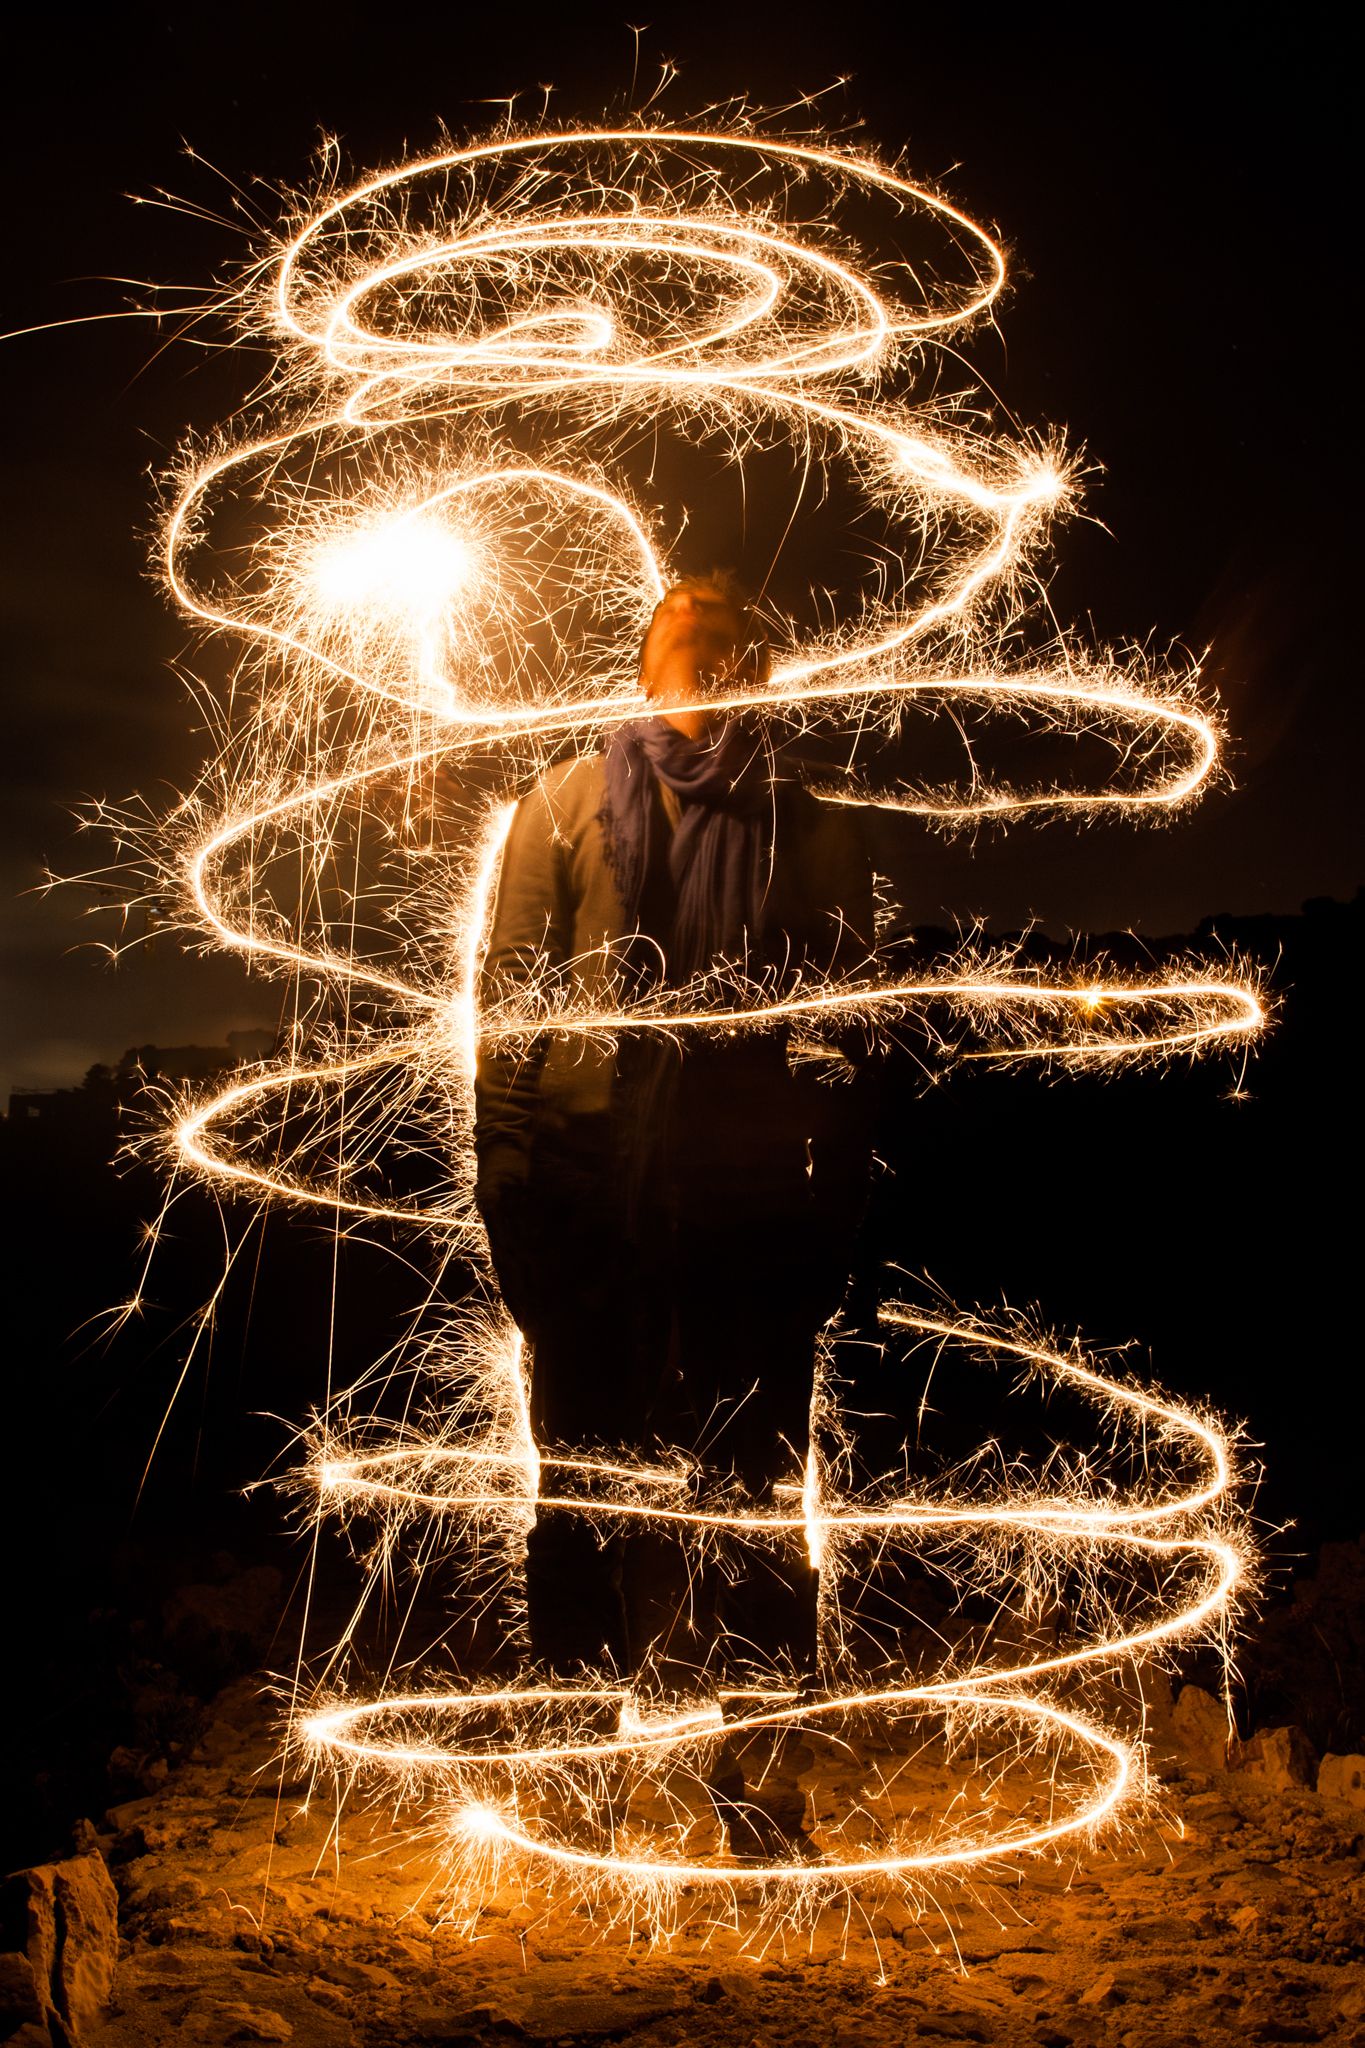 Light Painting - le tuto - partie 1 | Light painting, Lights and ...